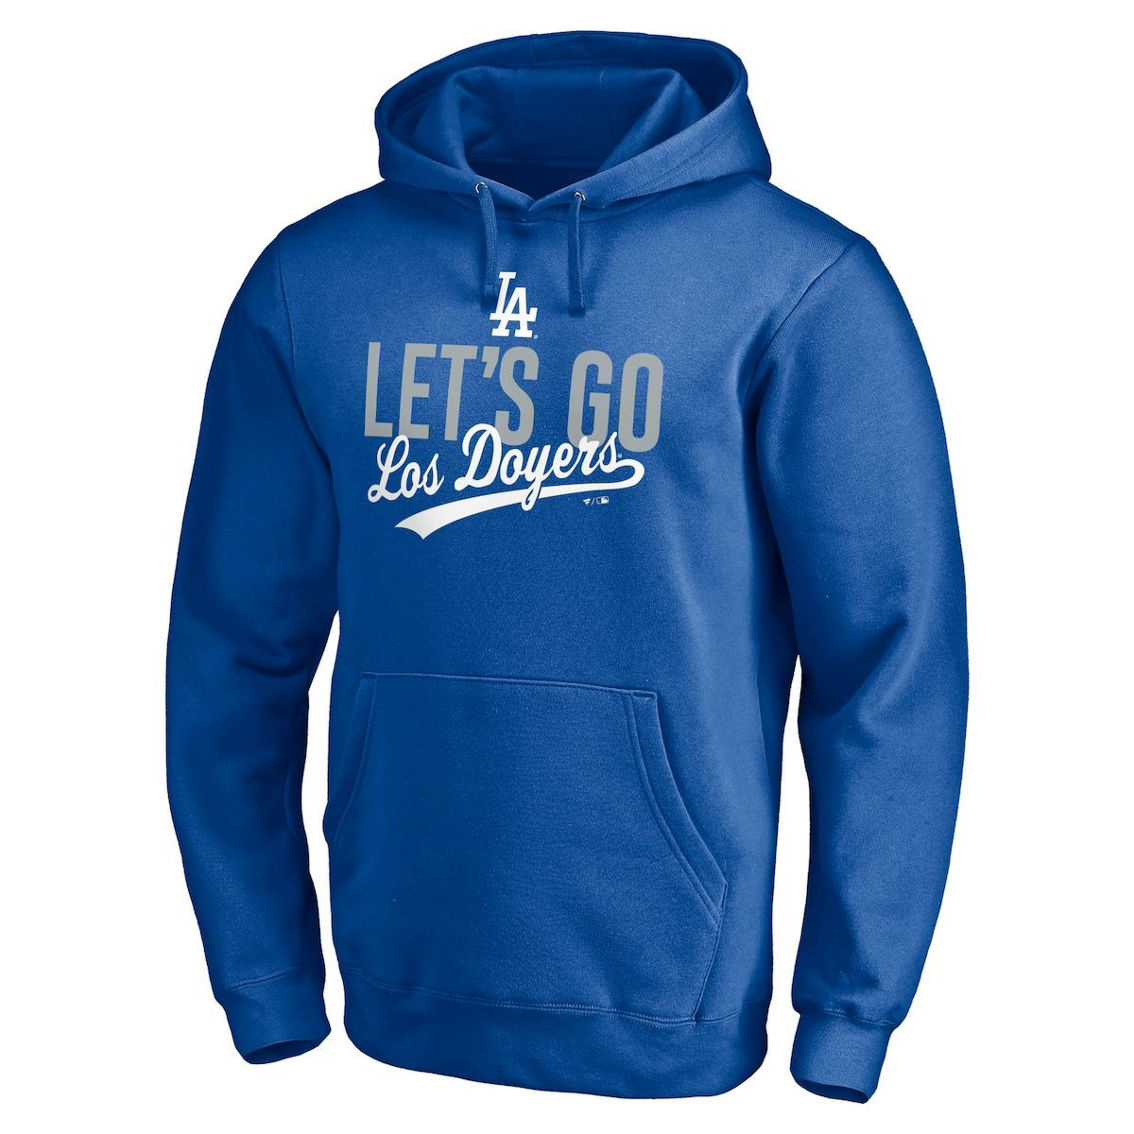 Men's Fanatics Branded Royal Los Angeles Dodgers Hometown Los Doyers Fitted Pullover Hoodie - Image 3 of 4